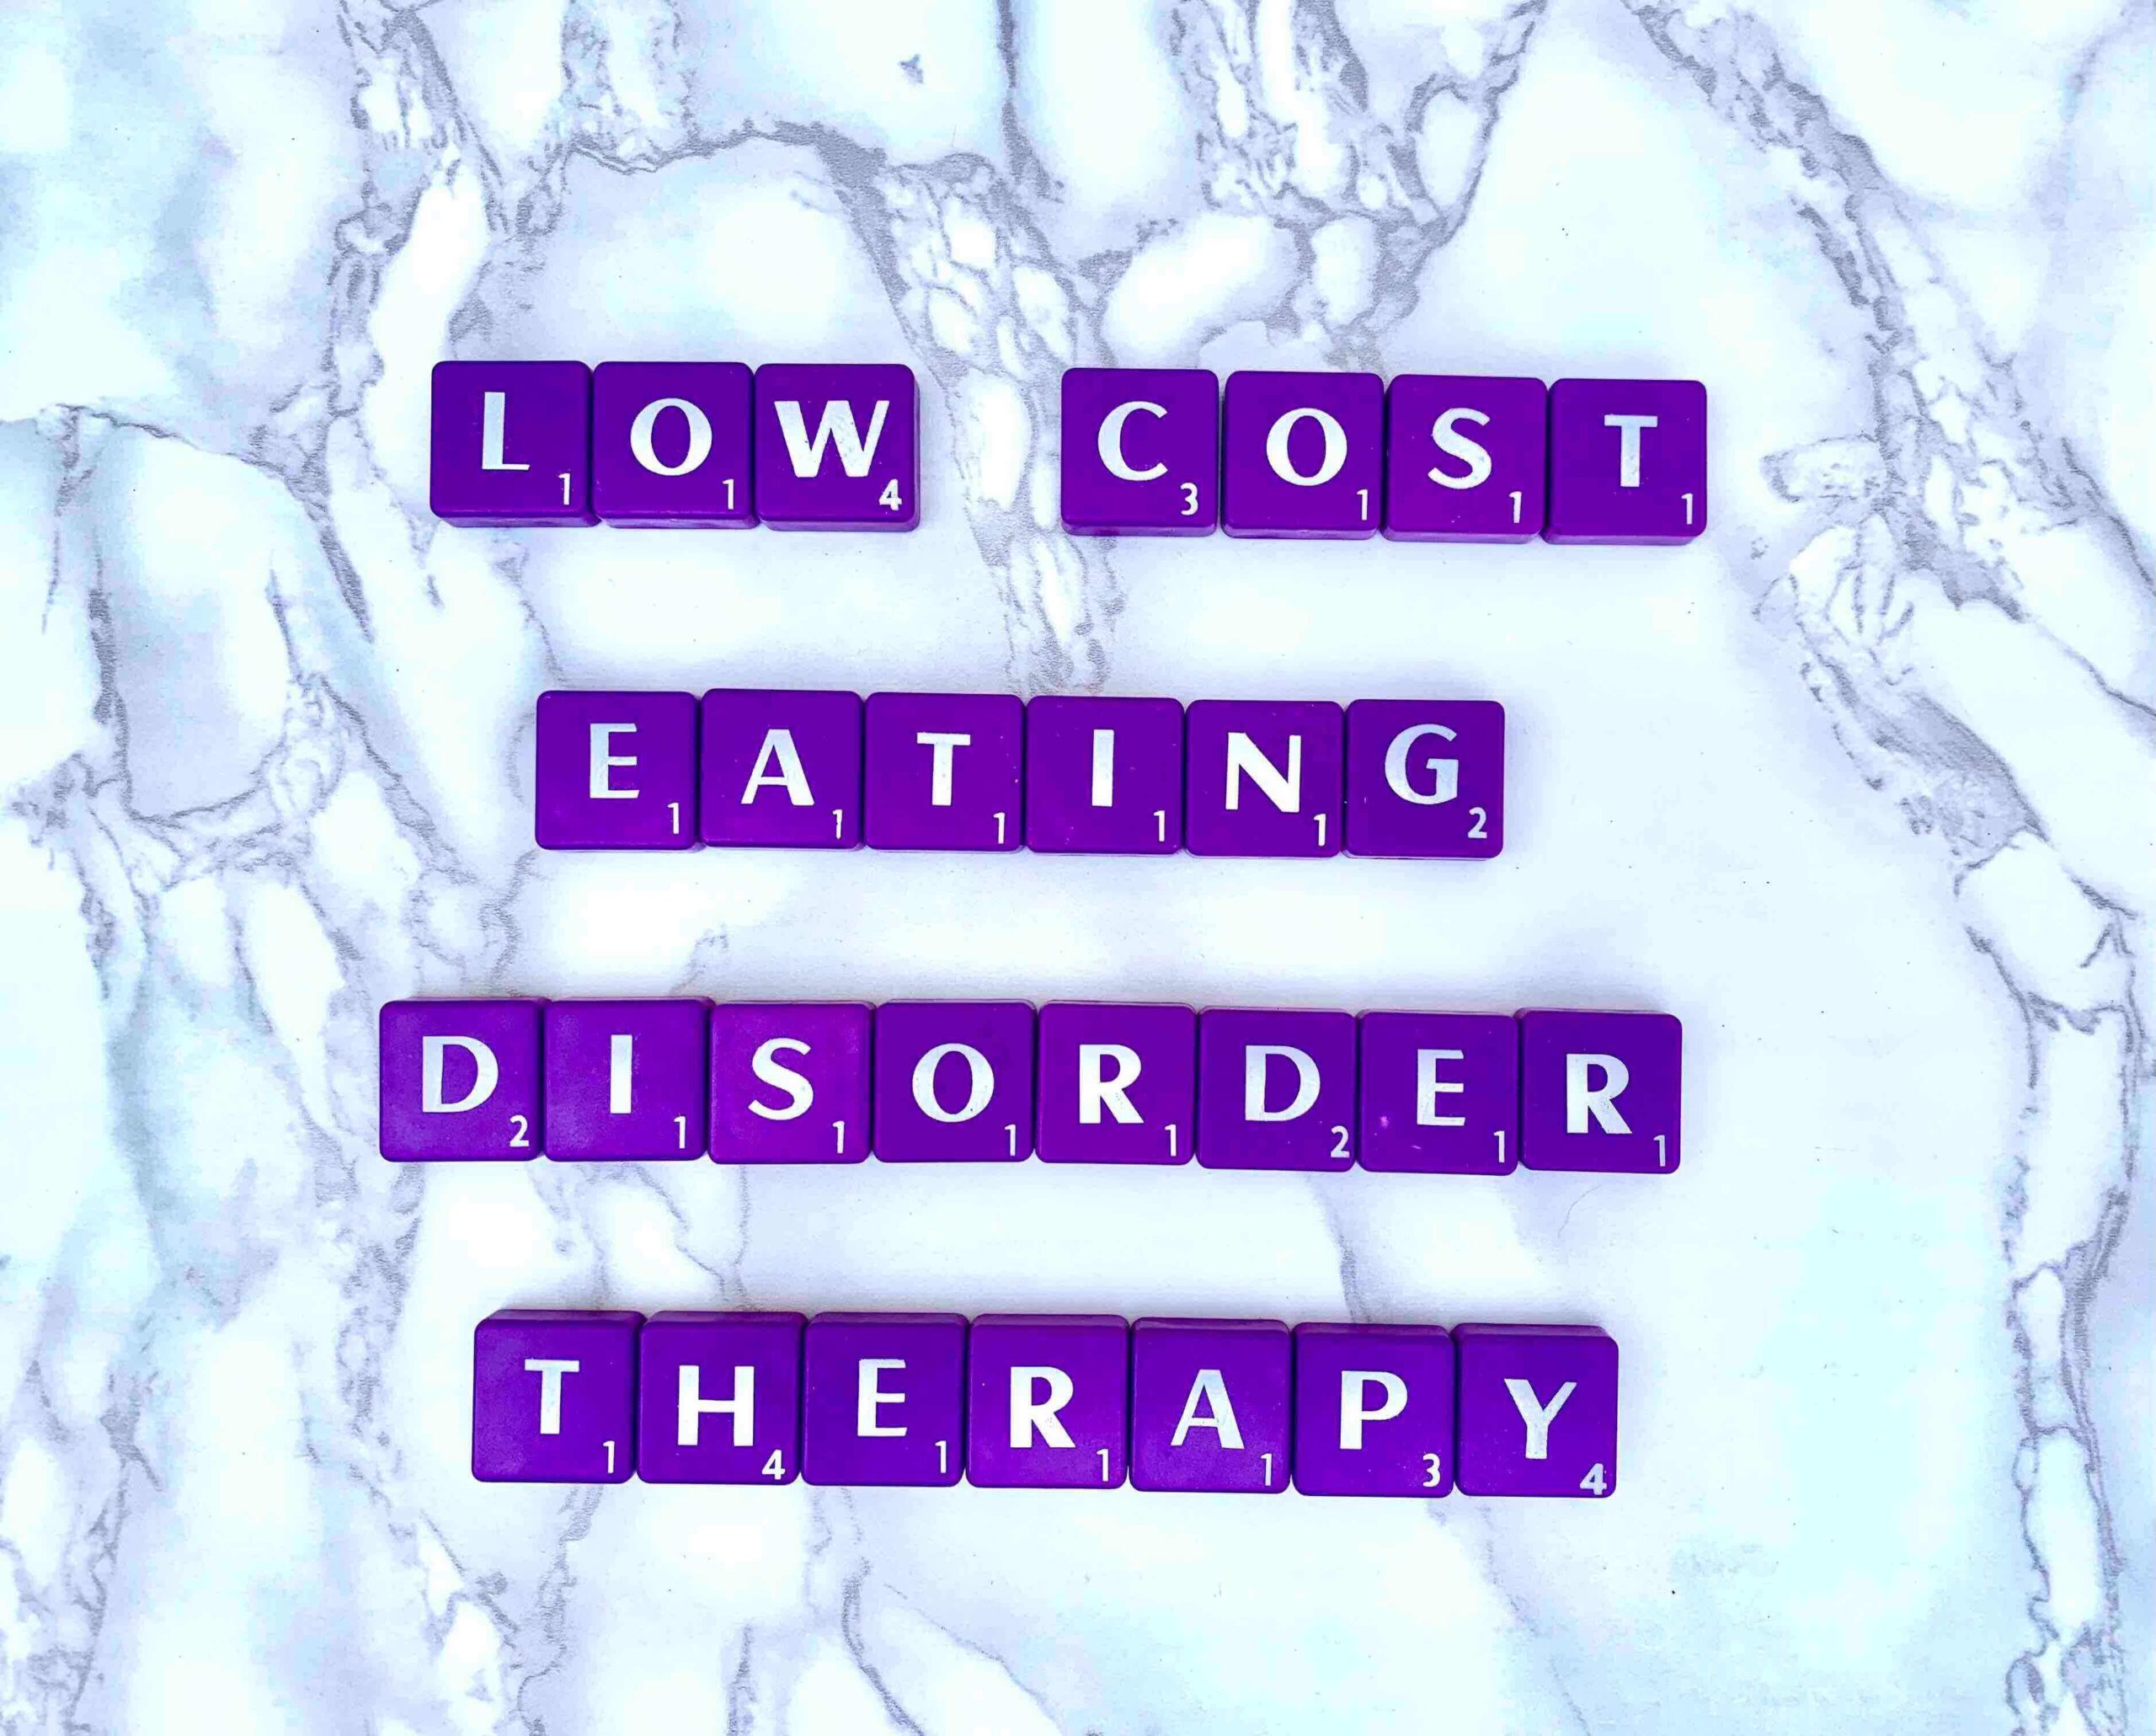 Low-Cost Eating Disorder Counseling in Los Angeles, California